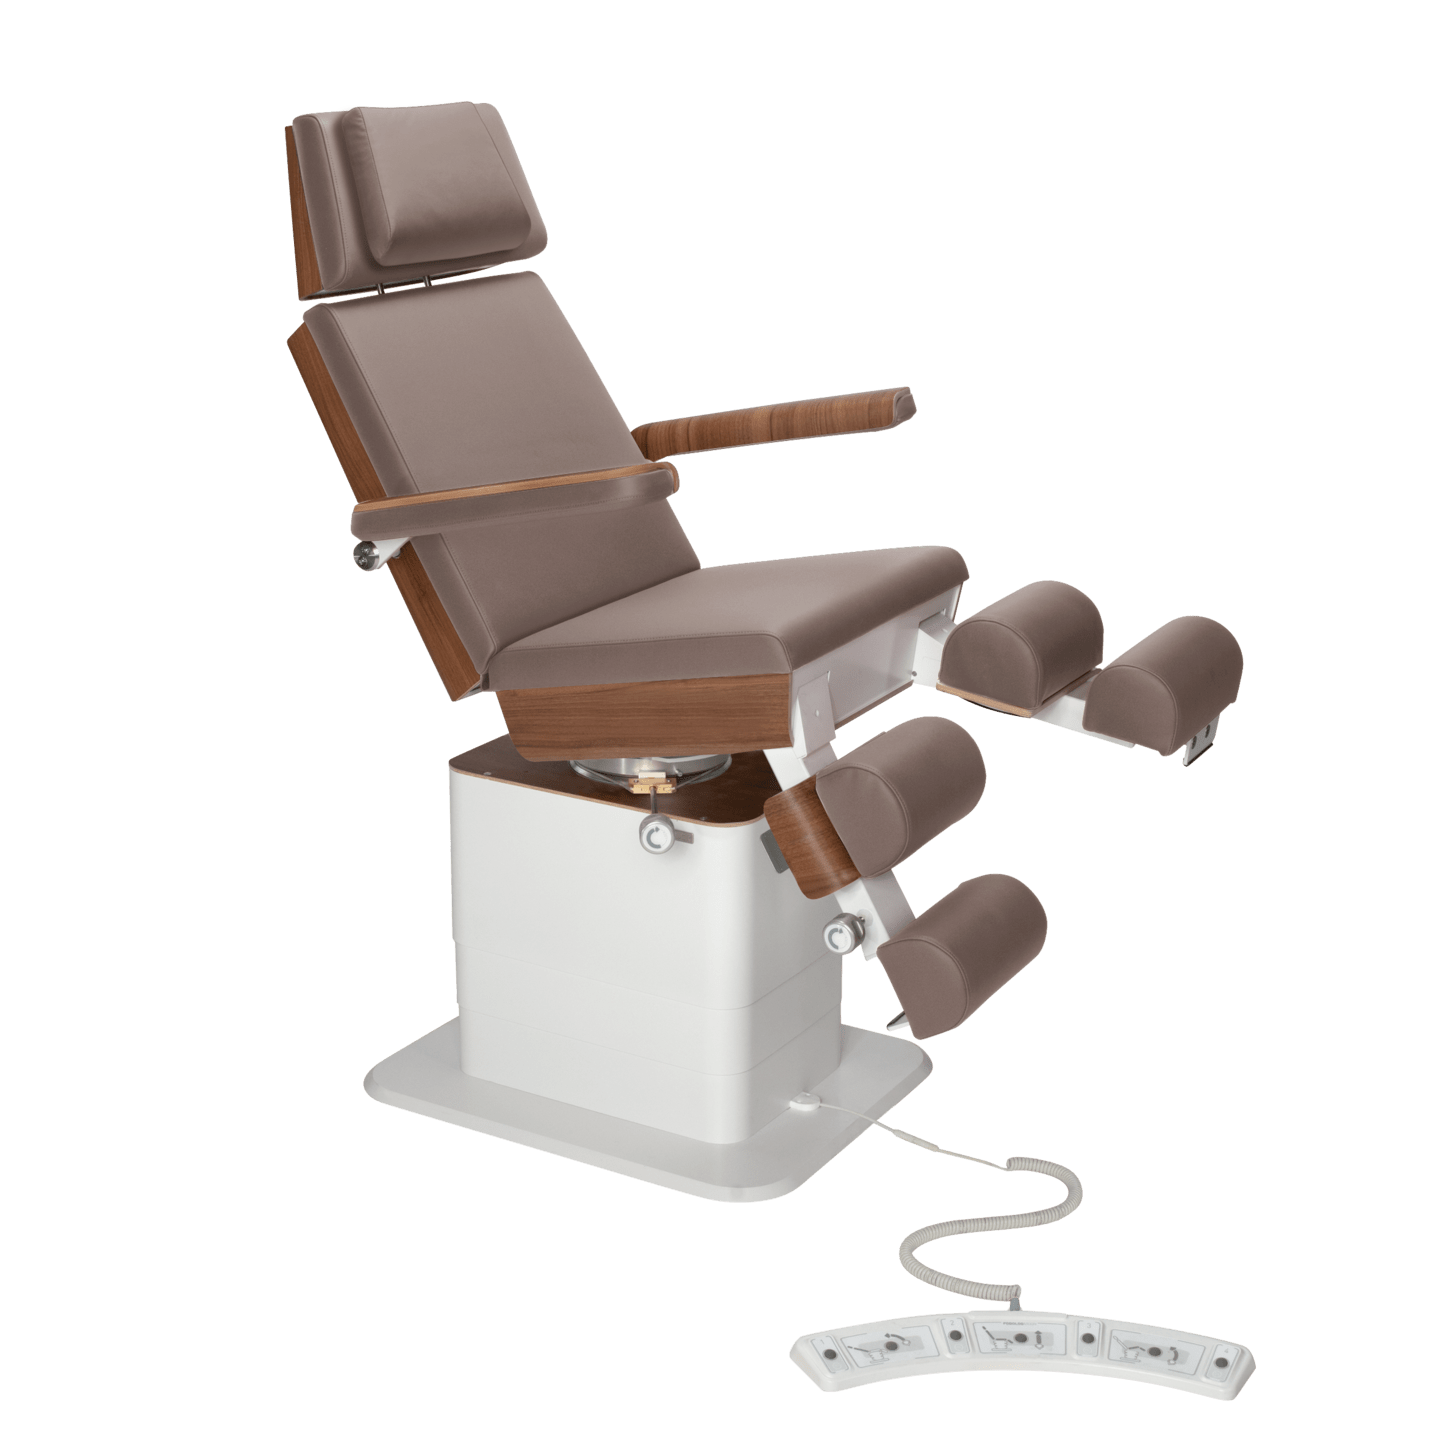 RUCK - MOON Podiatry Chair/Couch (with gas assisted leg sections) in nutmeg